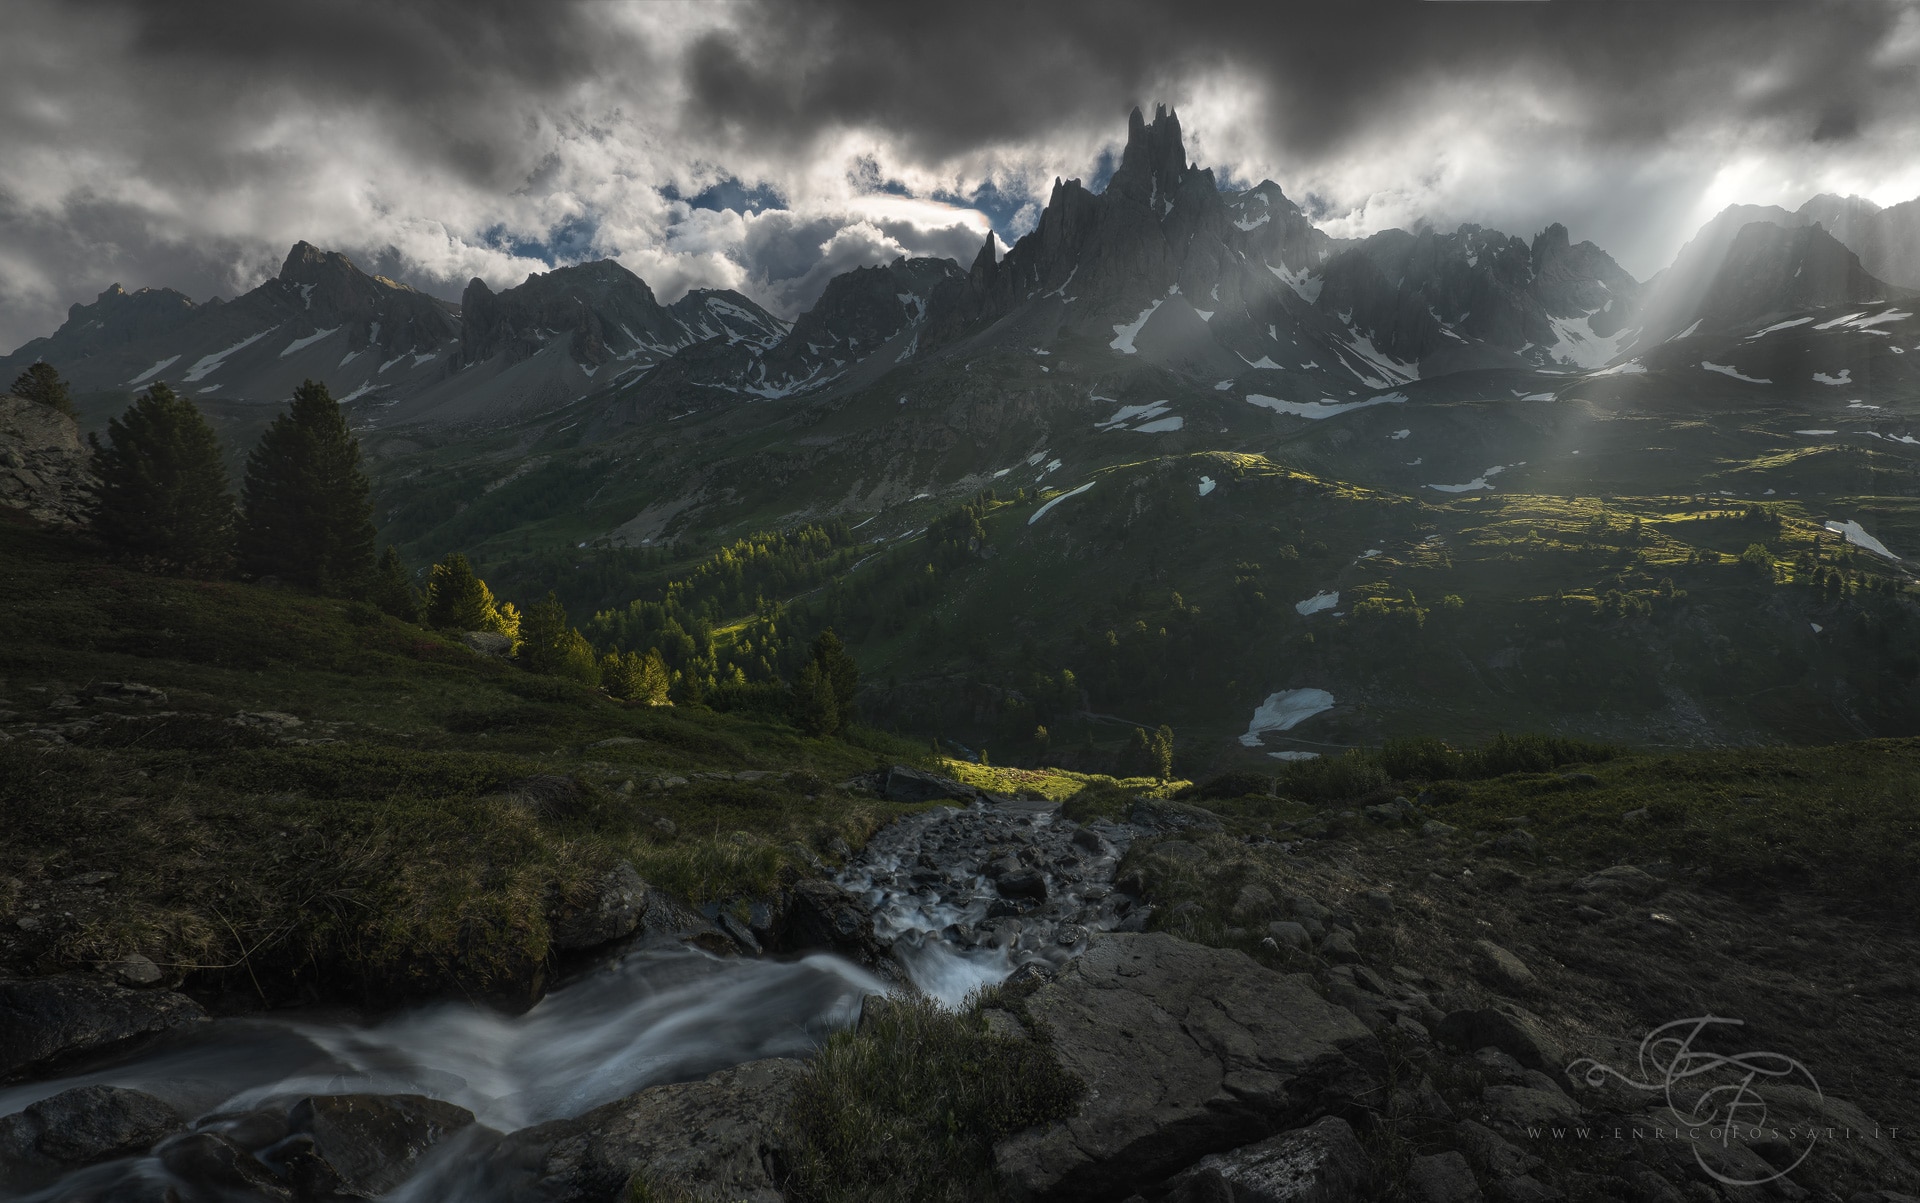 French Alps 2022 - Photography Workshops by Erin Babnik